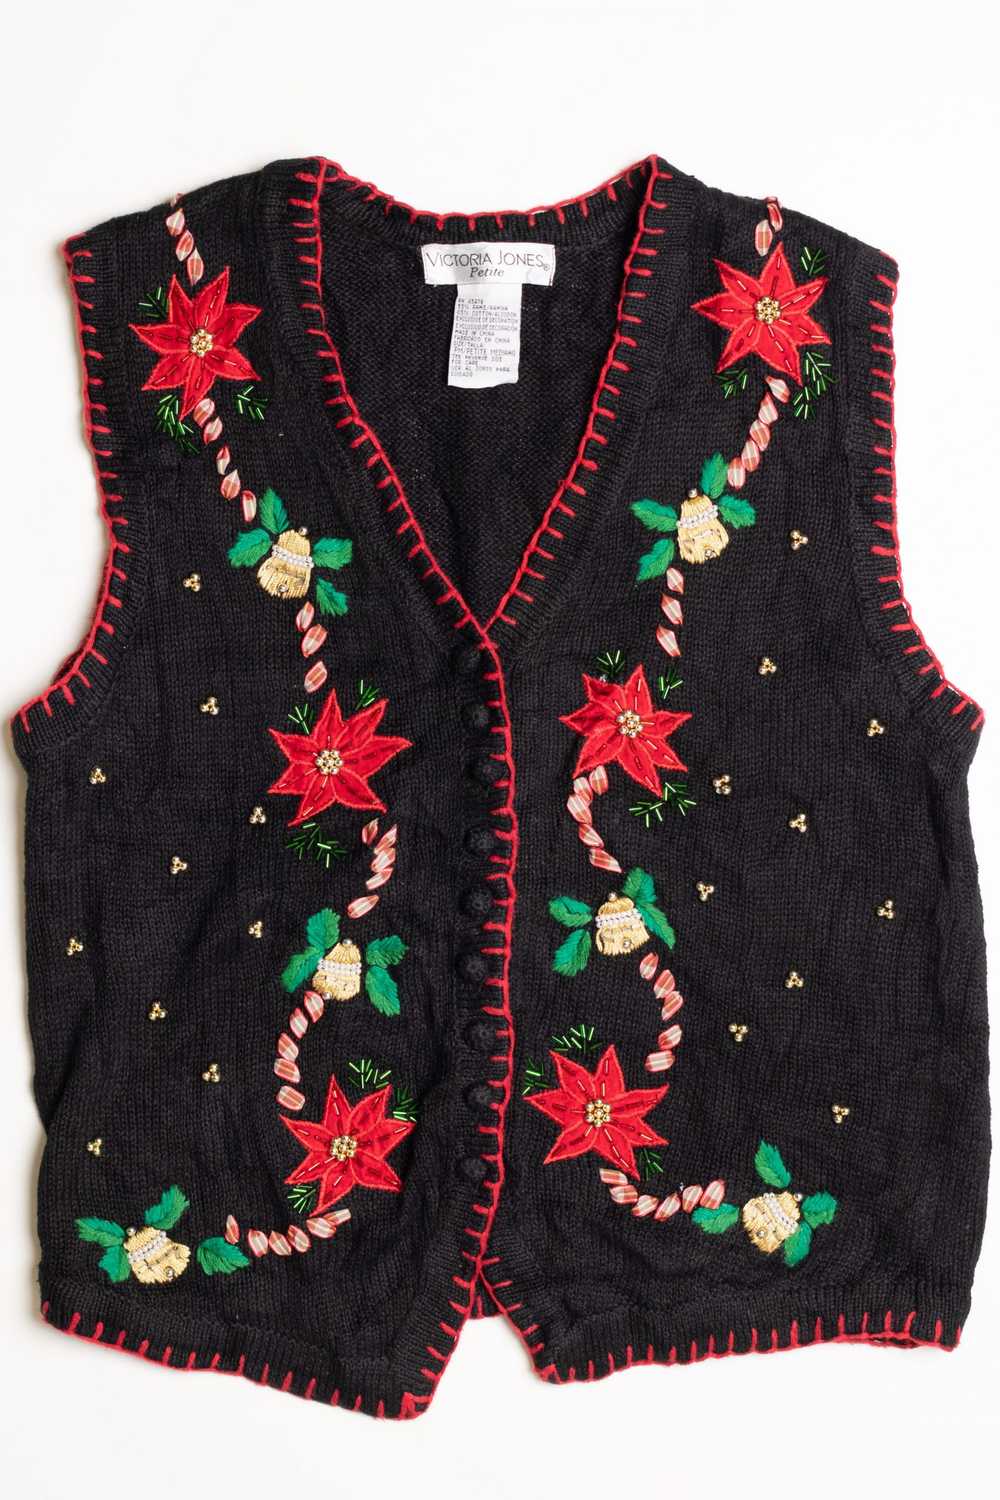 Ugly Christmas Sweater Vest 41 - image 2